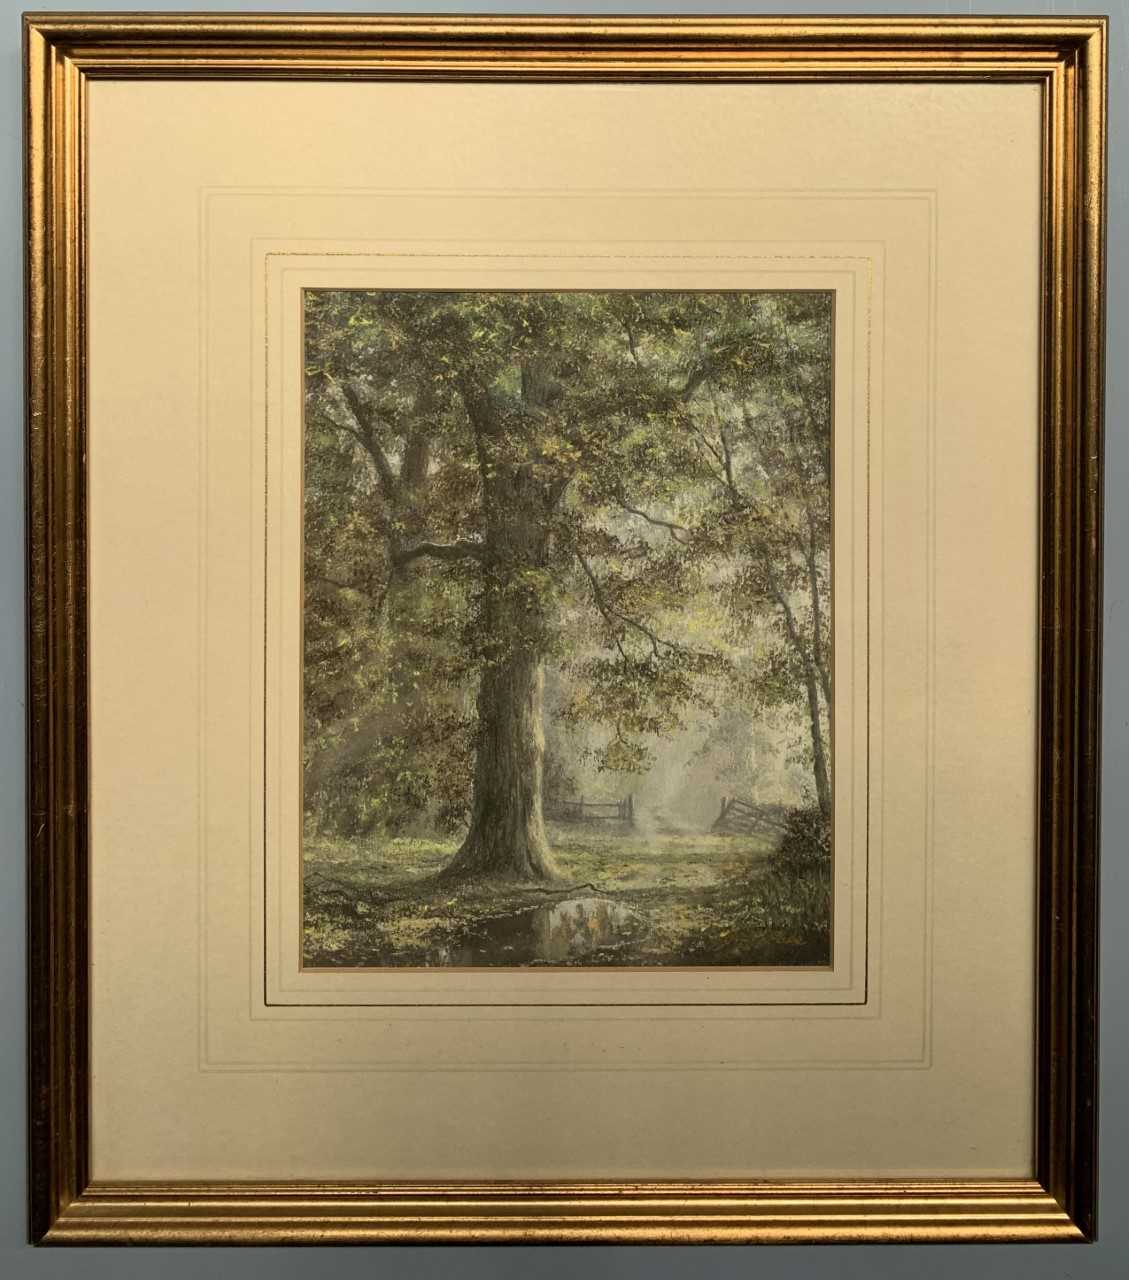 Don Kinrade (British, 20th century),'After The Rain', pastel, signed, 7x9ins,14x16ins inclusive of